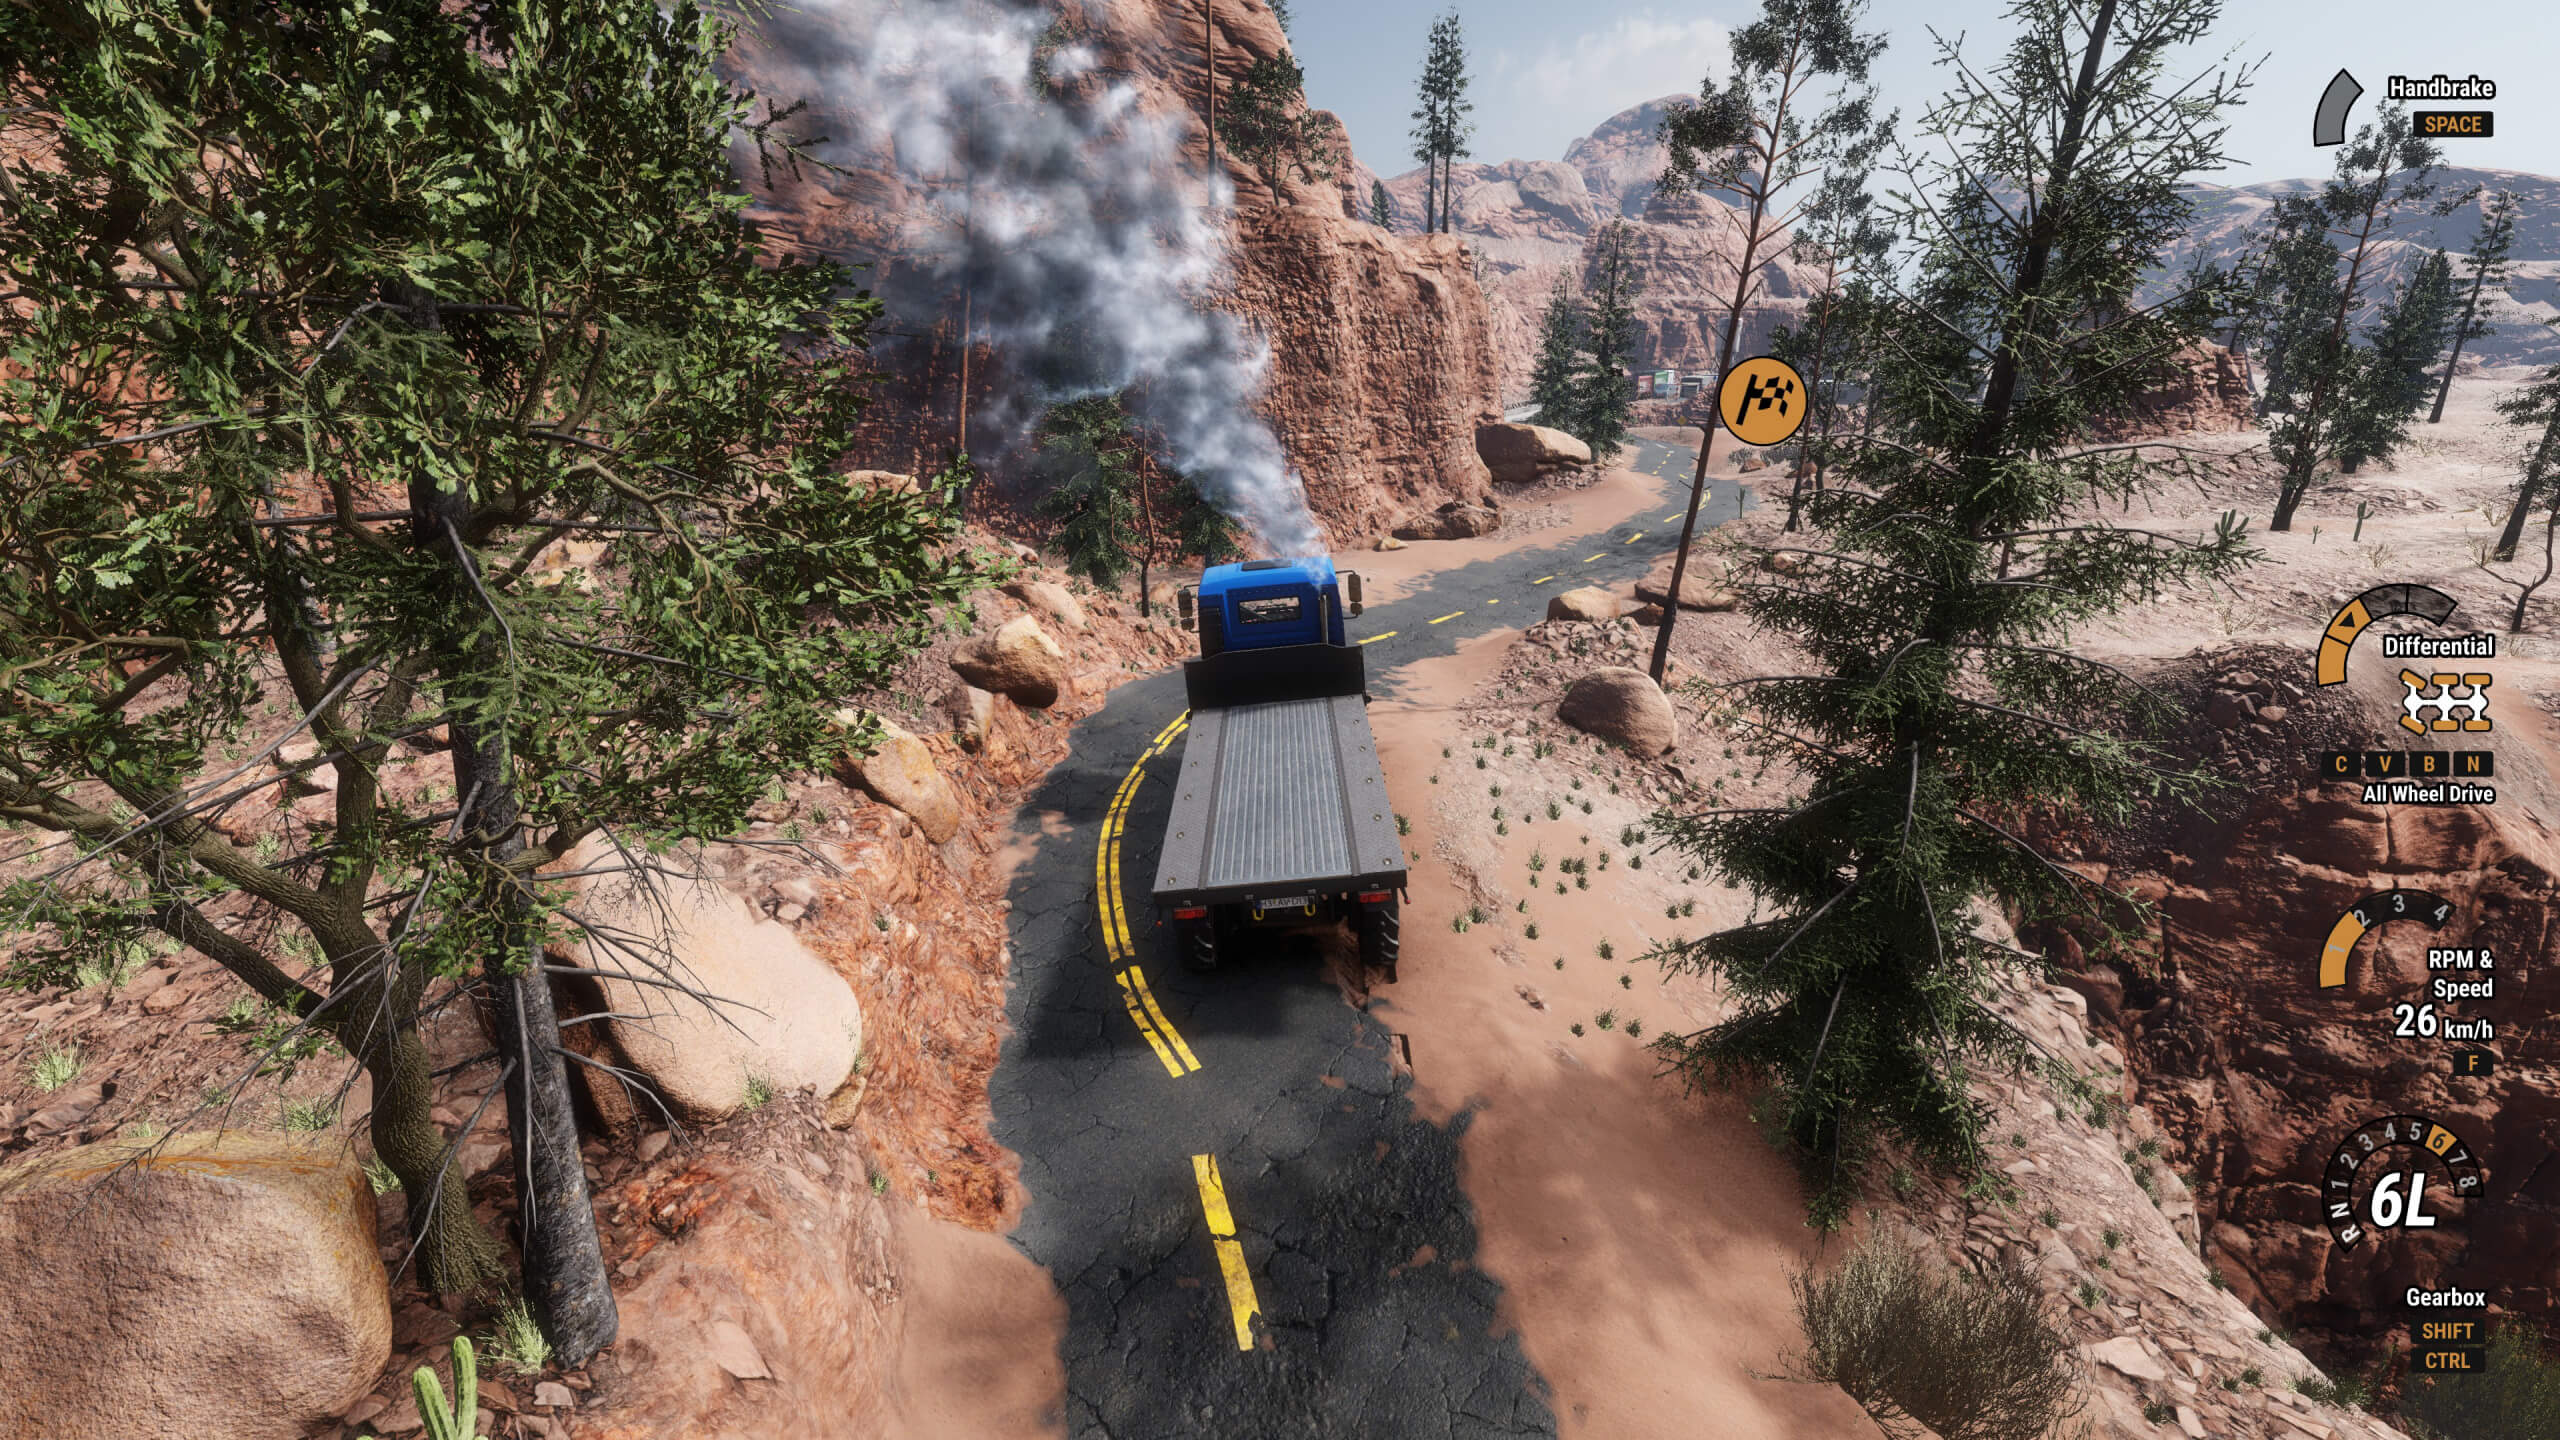 A flatbed cargo truck drives down a very unevenly paved road in a rocky area with trees lining the edge of the clearing.